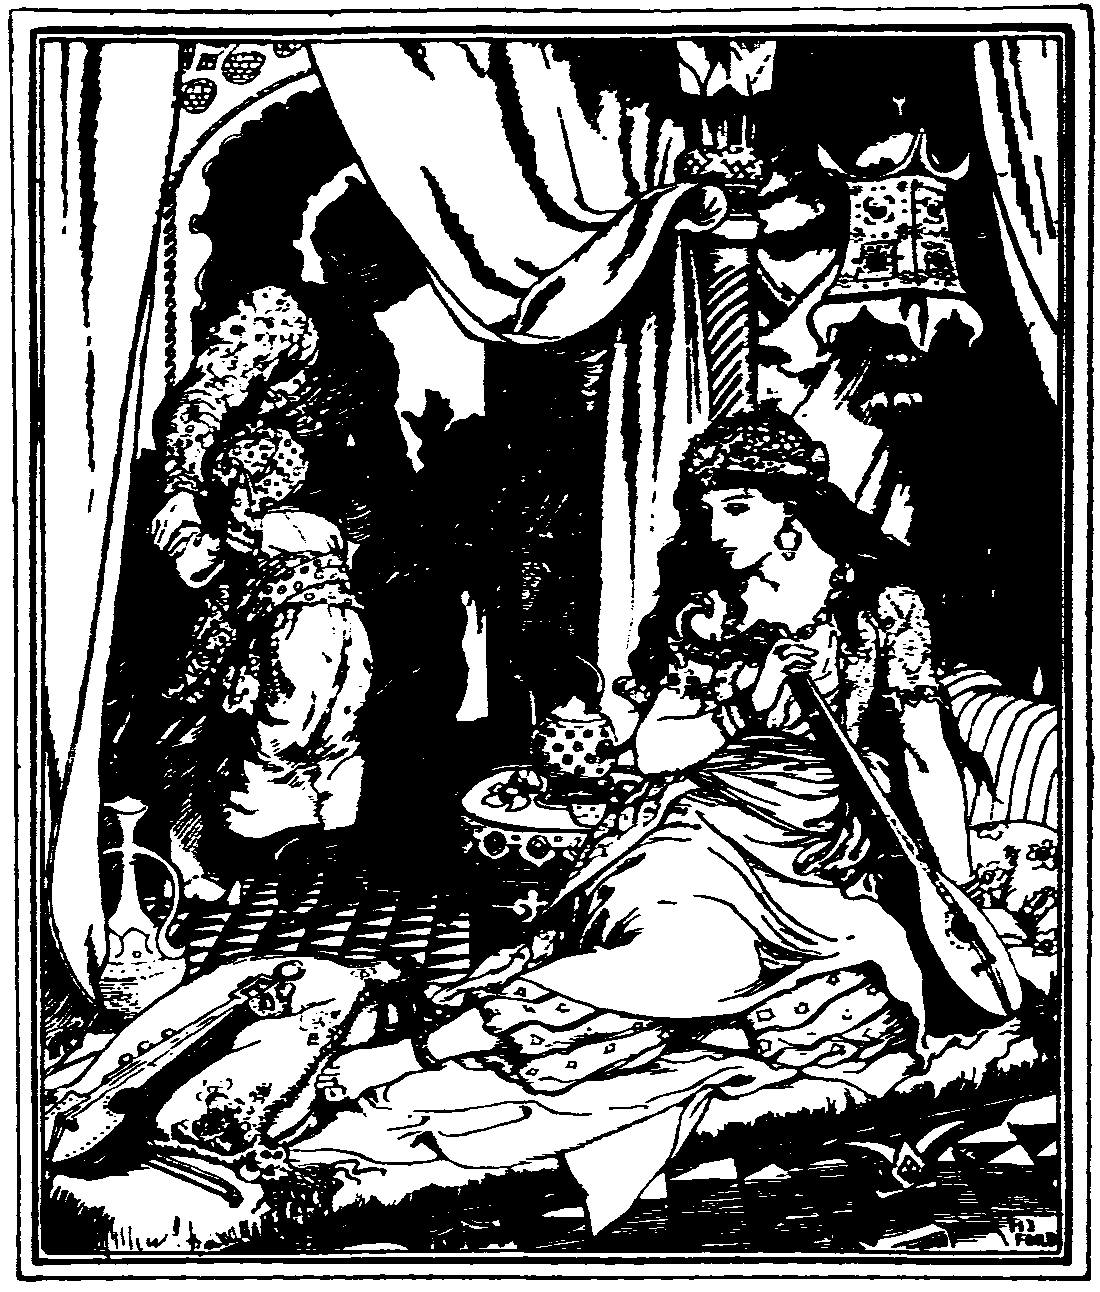 [Illustration] from The Arabian Nights by Andrew Lang